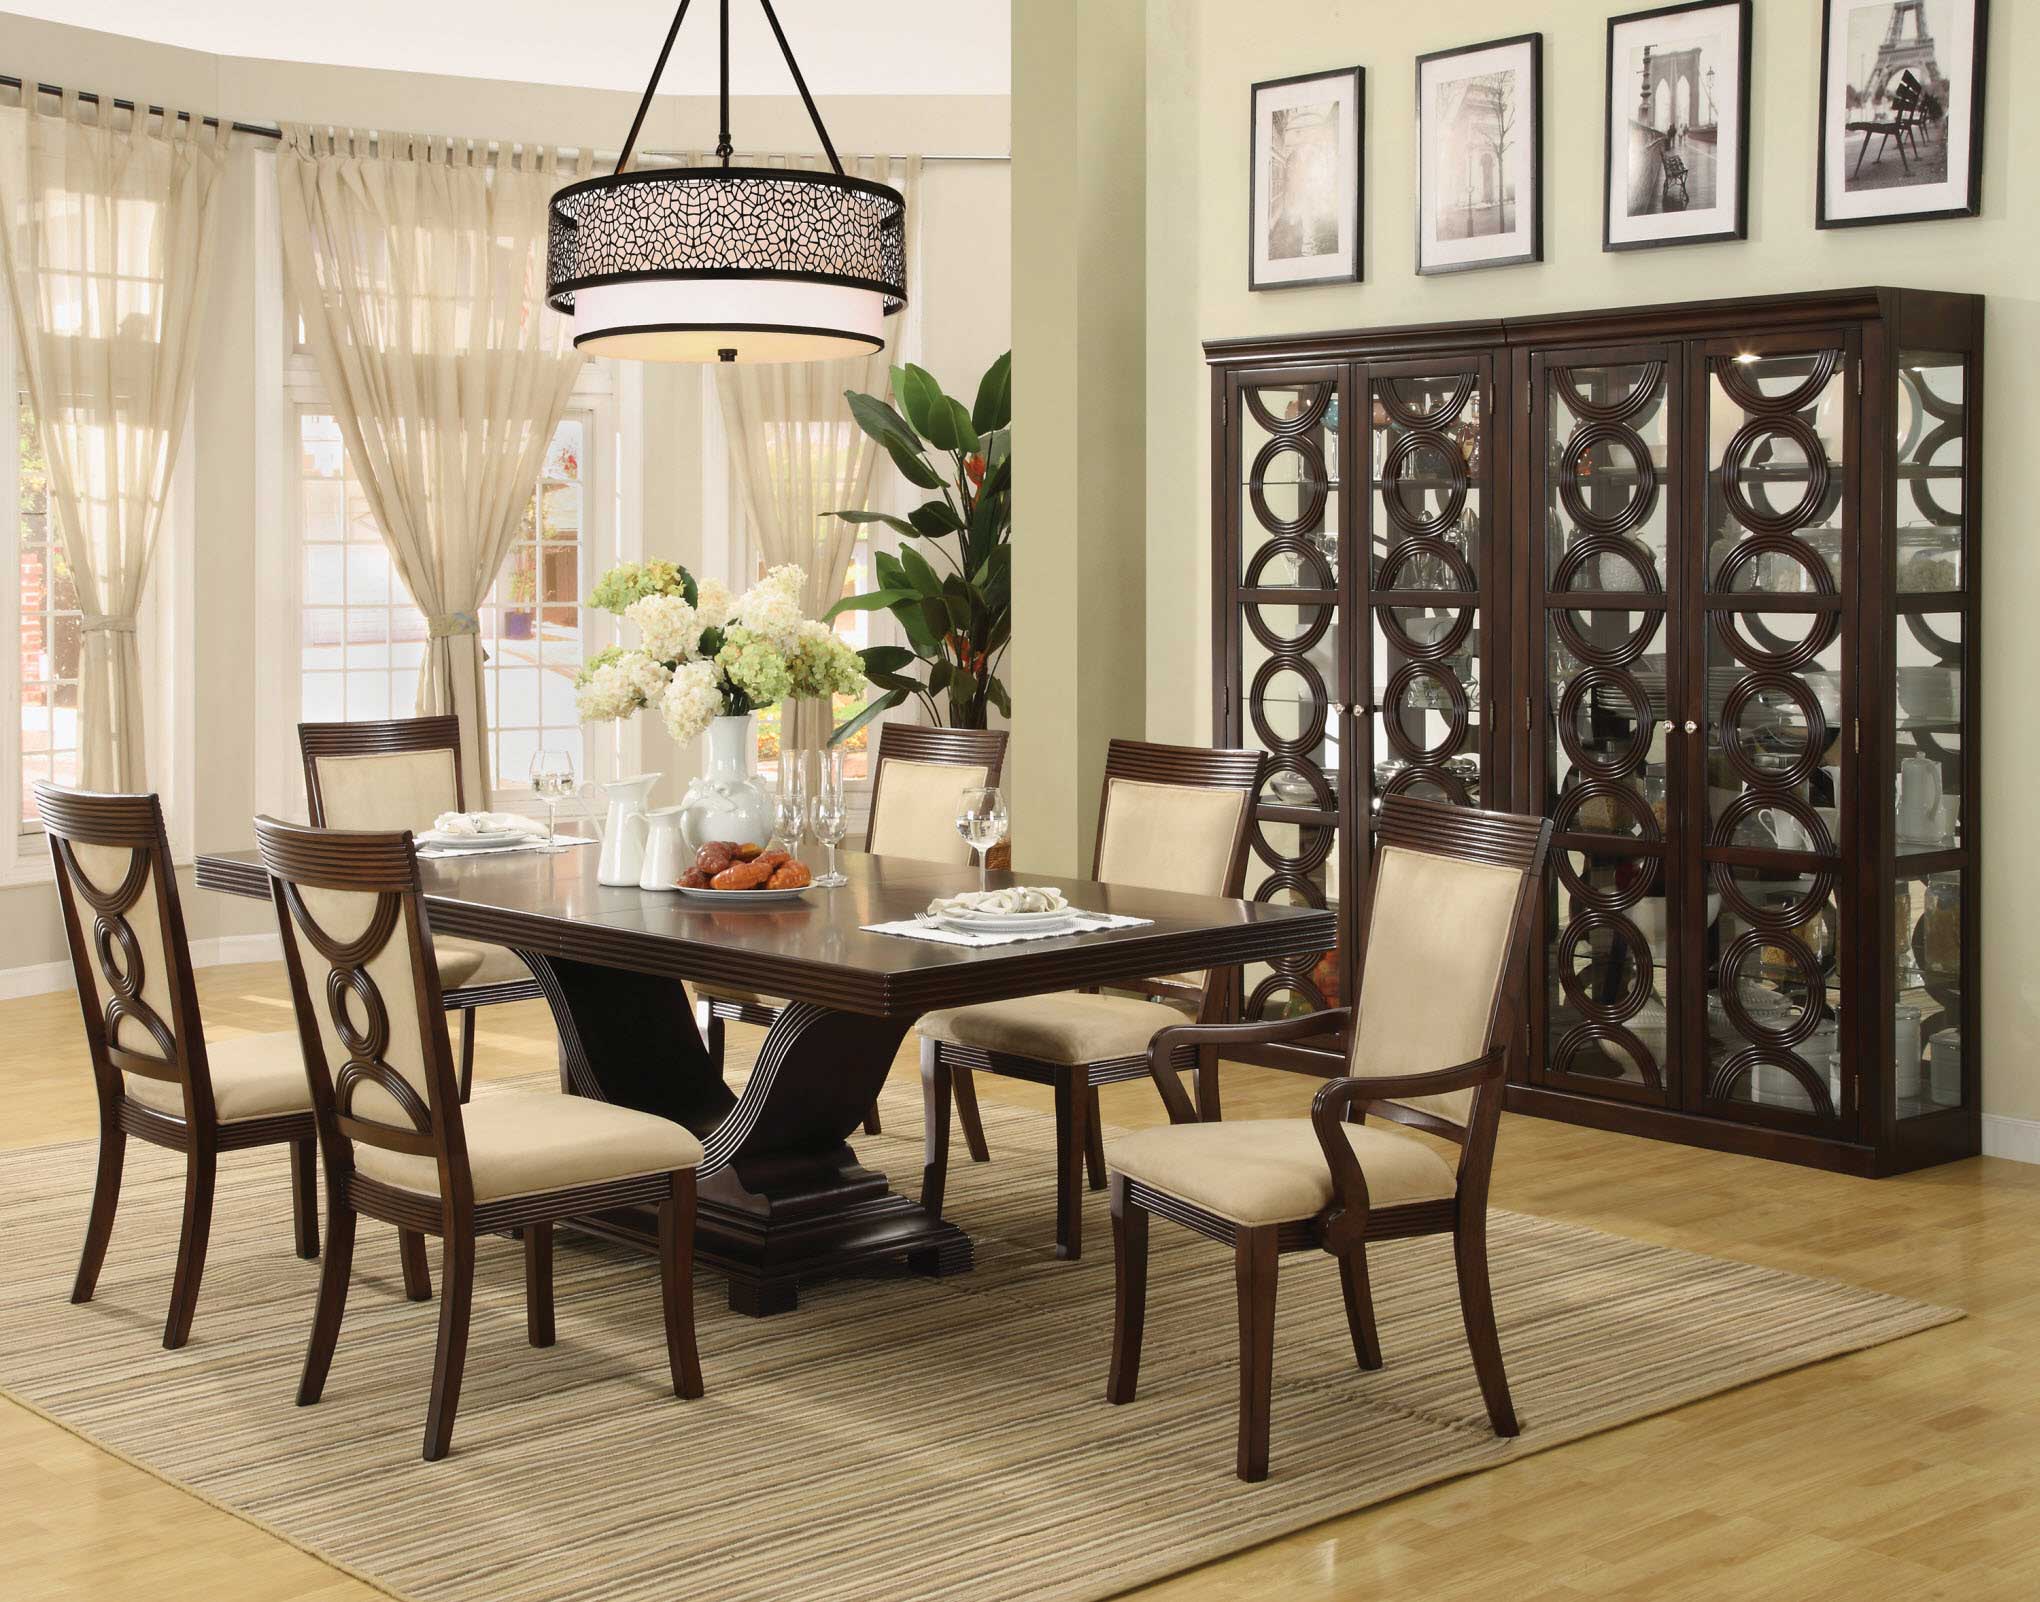 Dining Room Decorated Traditional Dining Room Interior Design Decorated With Wooden Dining Table Completed With Small Dining Room Light Fixtures Dining Room Dining Room Lighting Fixtures With Chandelier And Fans To Enlighten Your Dining Experience